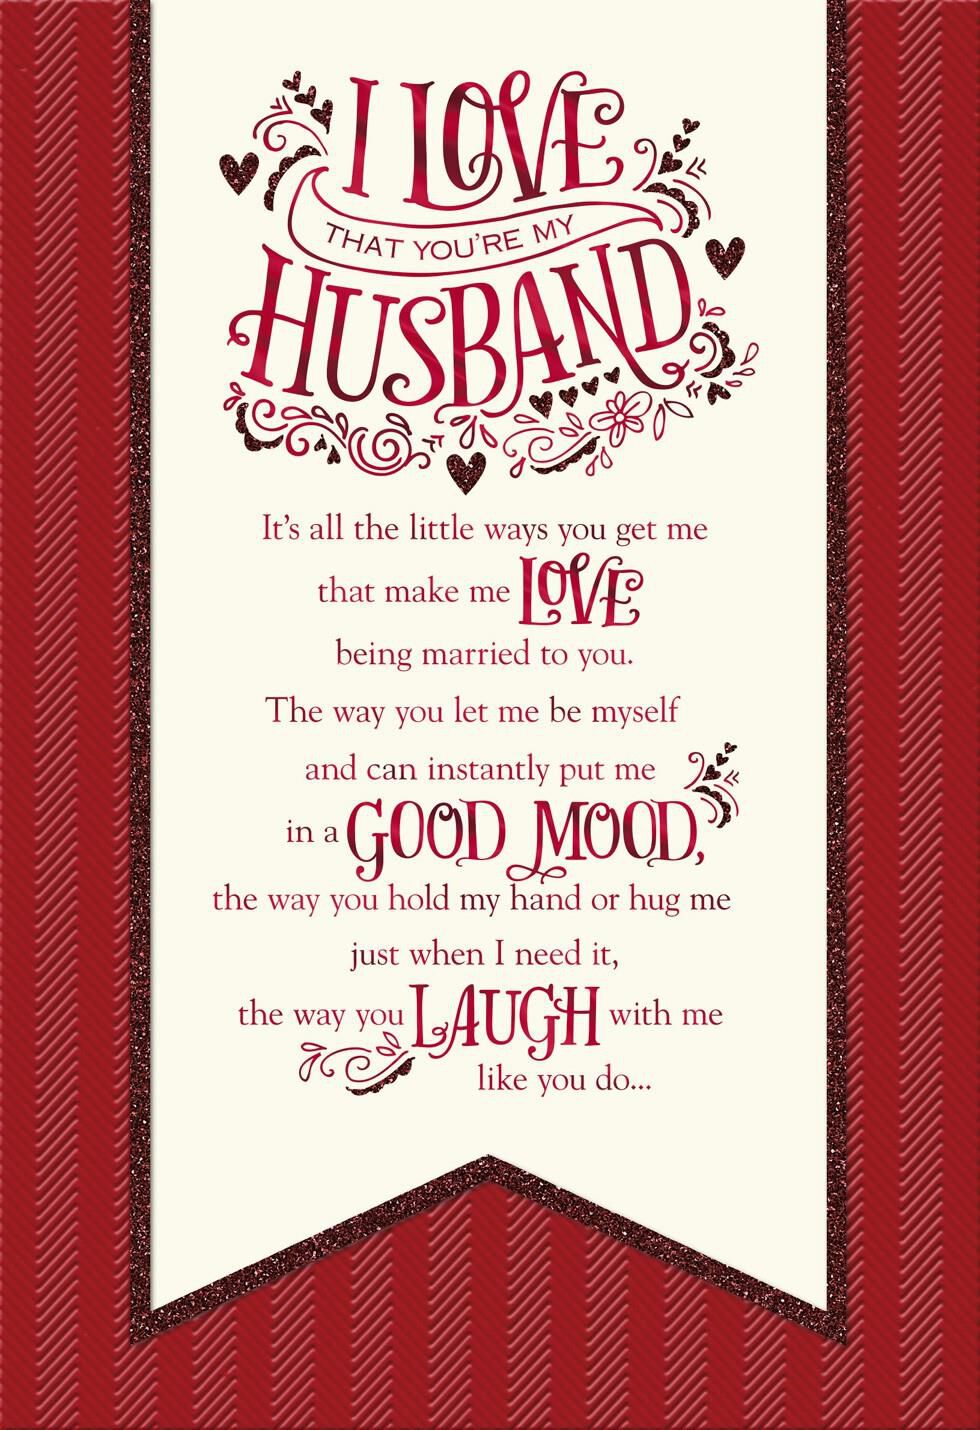 the-reasons-i-love-you-banner-valentine-s-day-card-for-husband